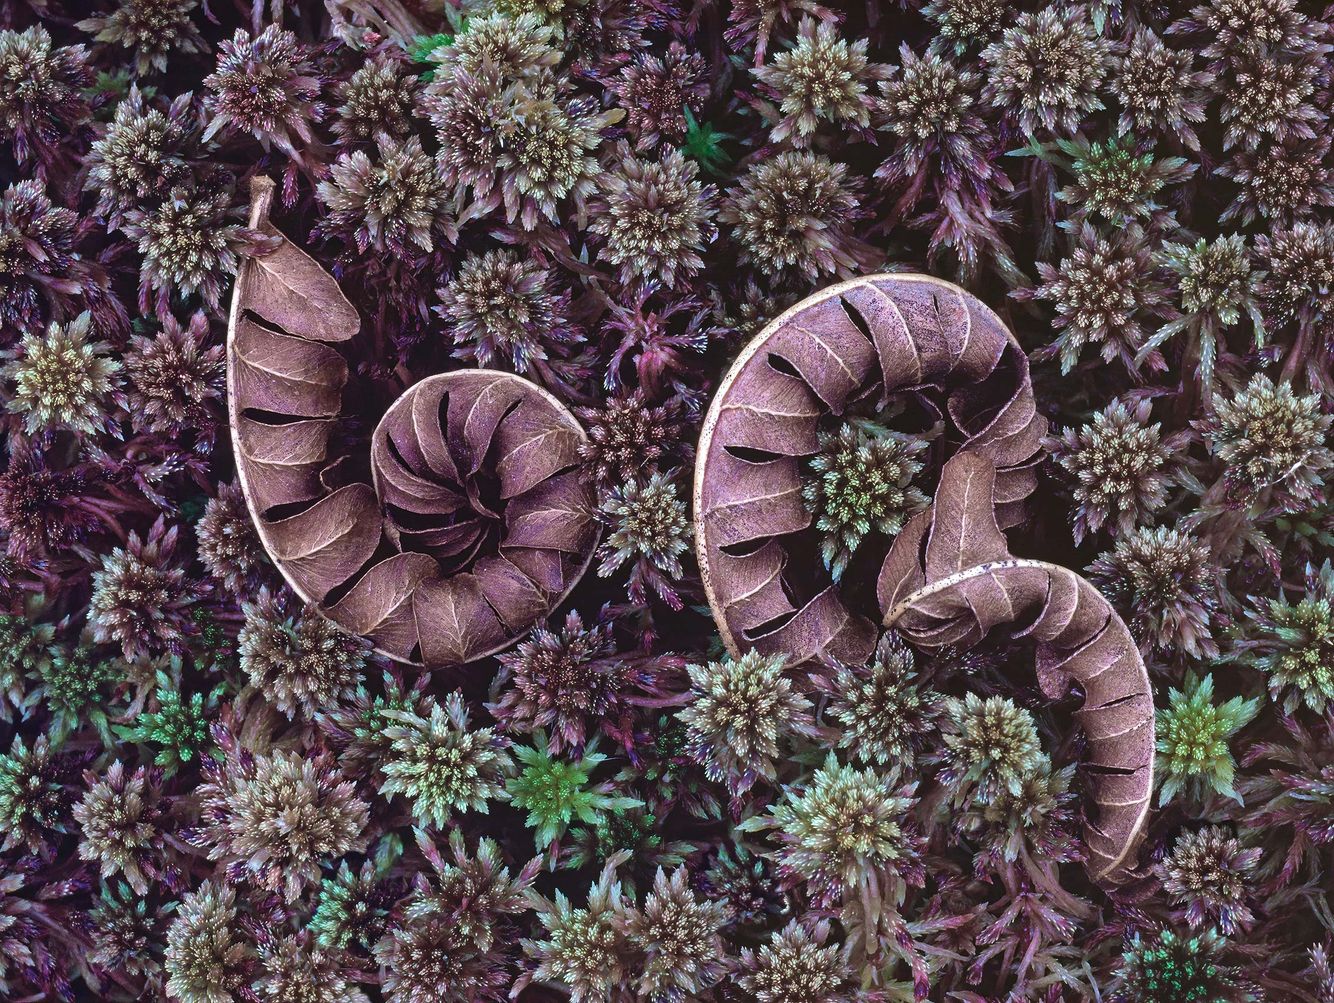 Ferns and Peat